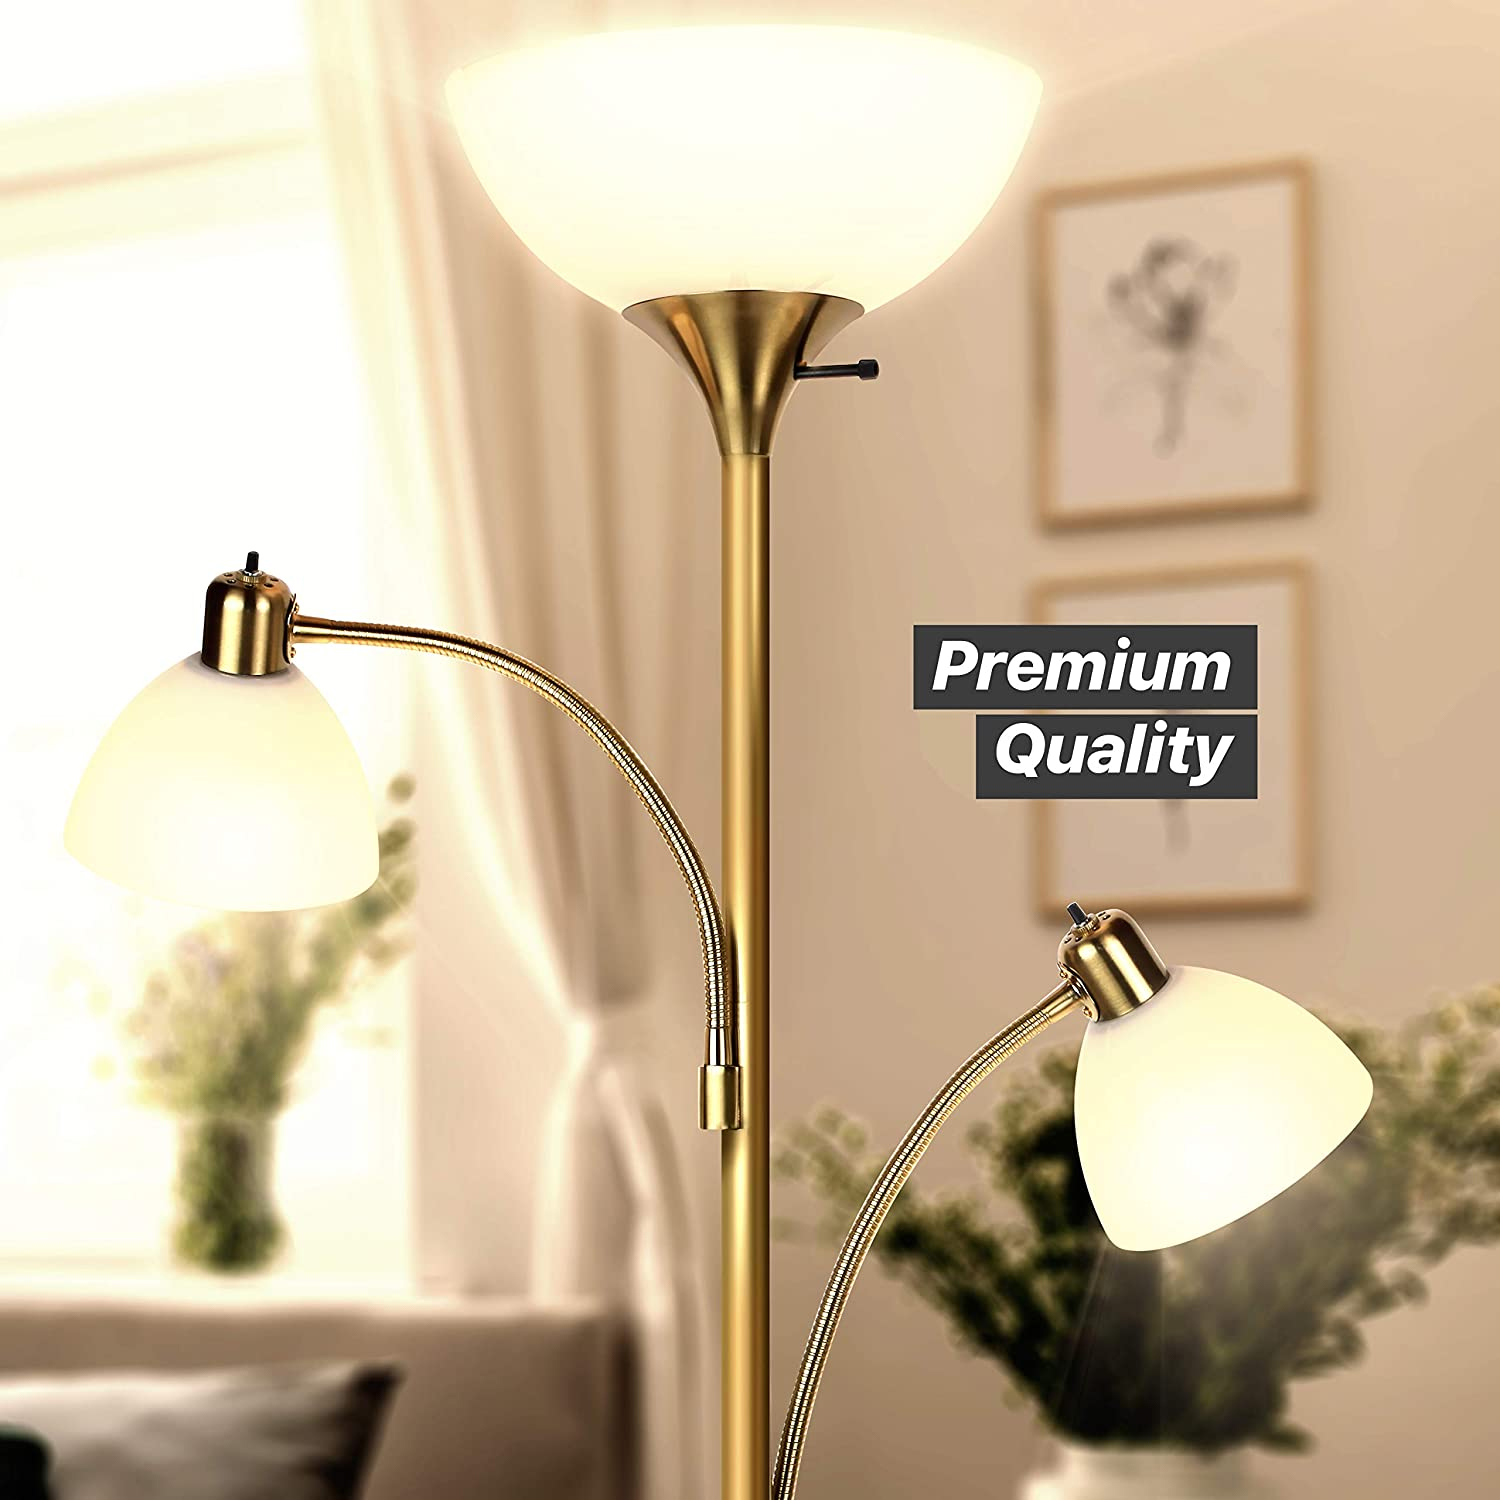 Brightech Sky Dome Double LED Torchiere 72 Inch Floor Lamp w/ 2 Reading